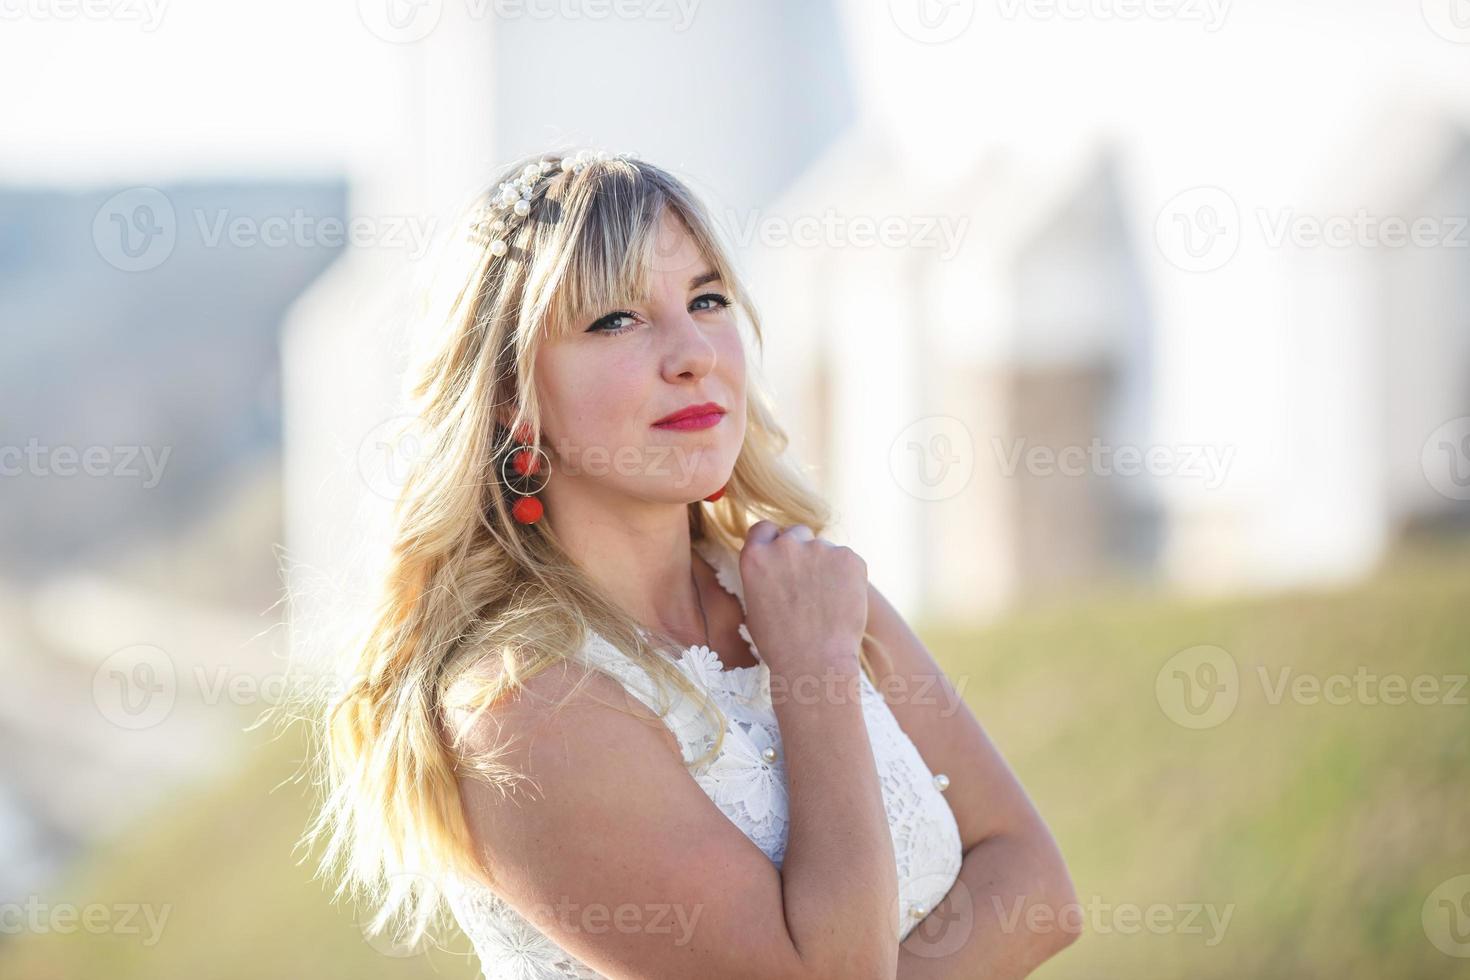 Outdoor close up portrait beautiful blonde girl with youth and skin care attractive looking at camera in white dress. Light key photo